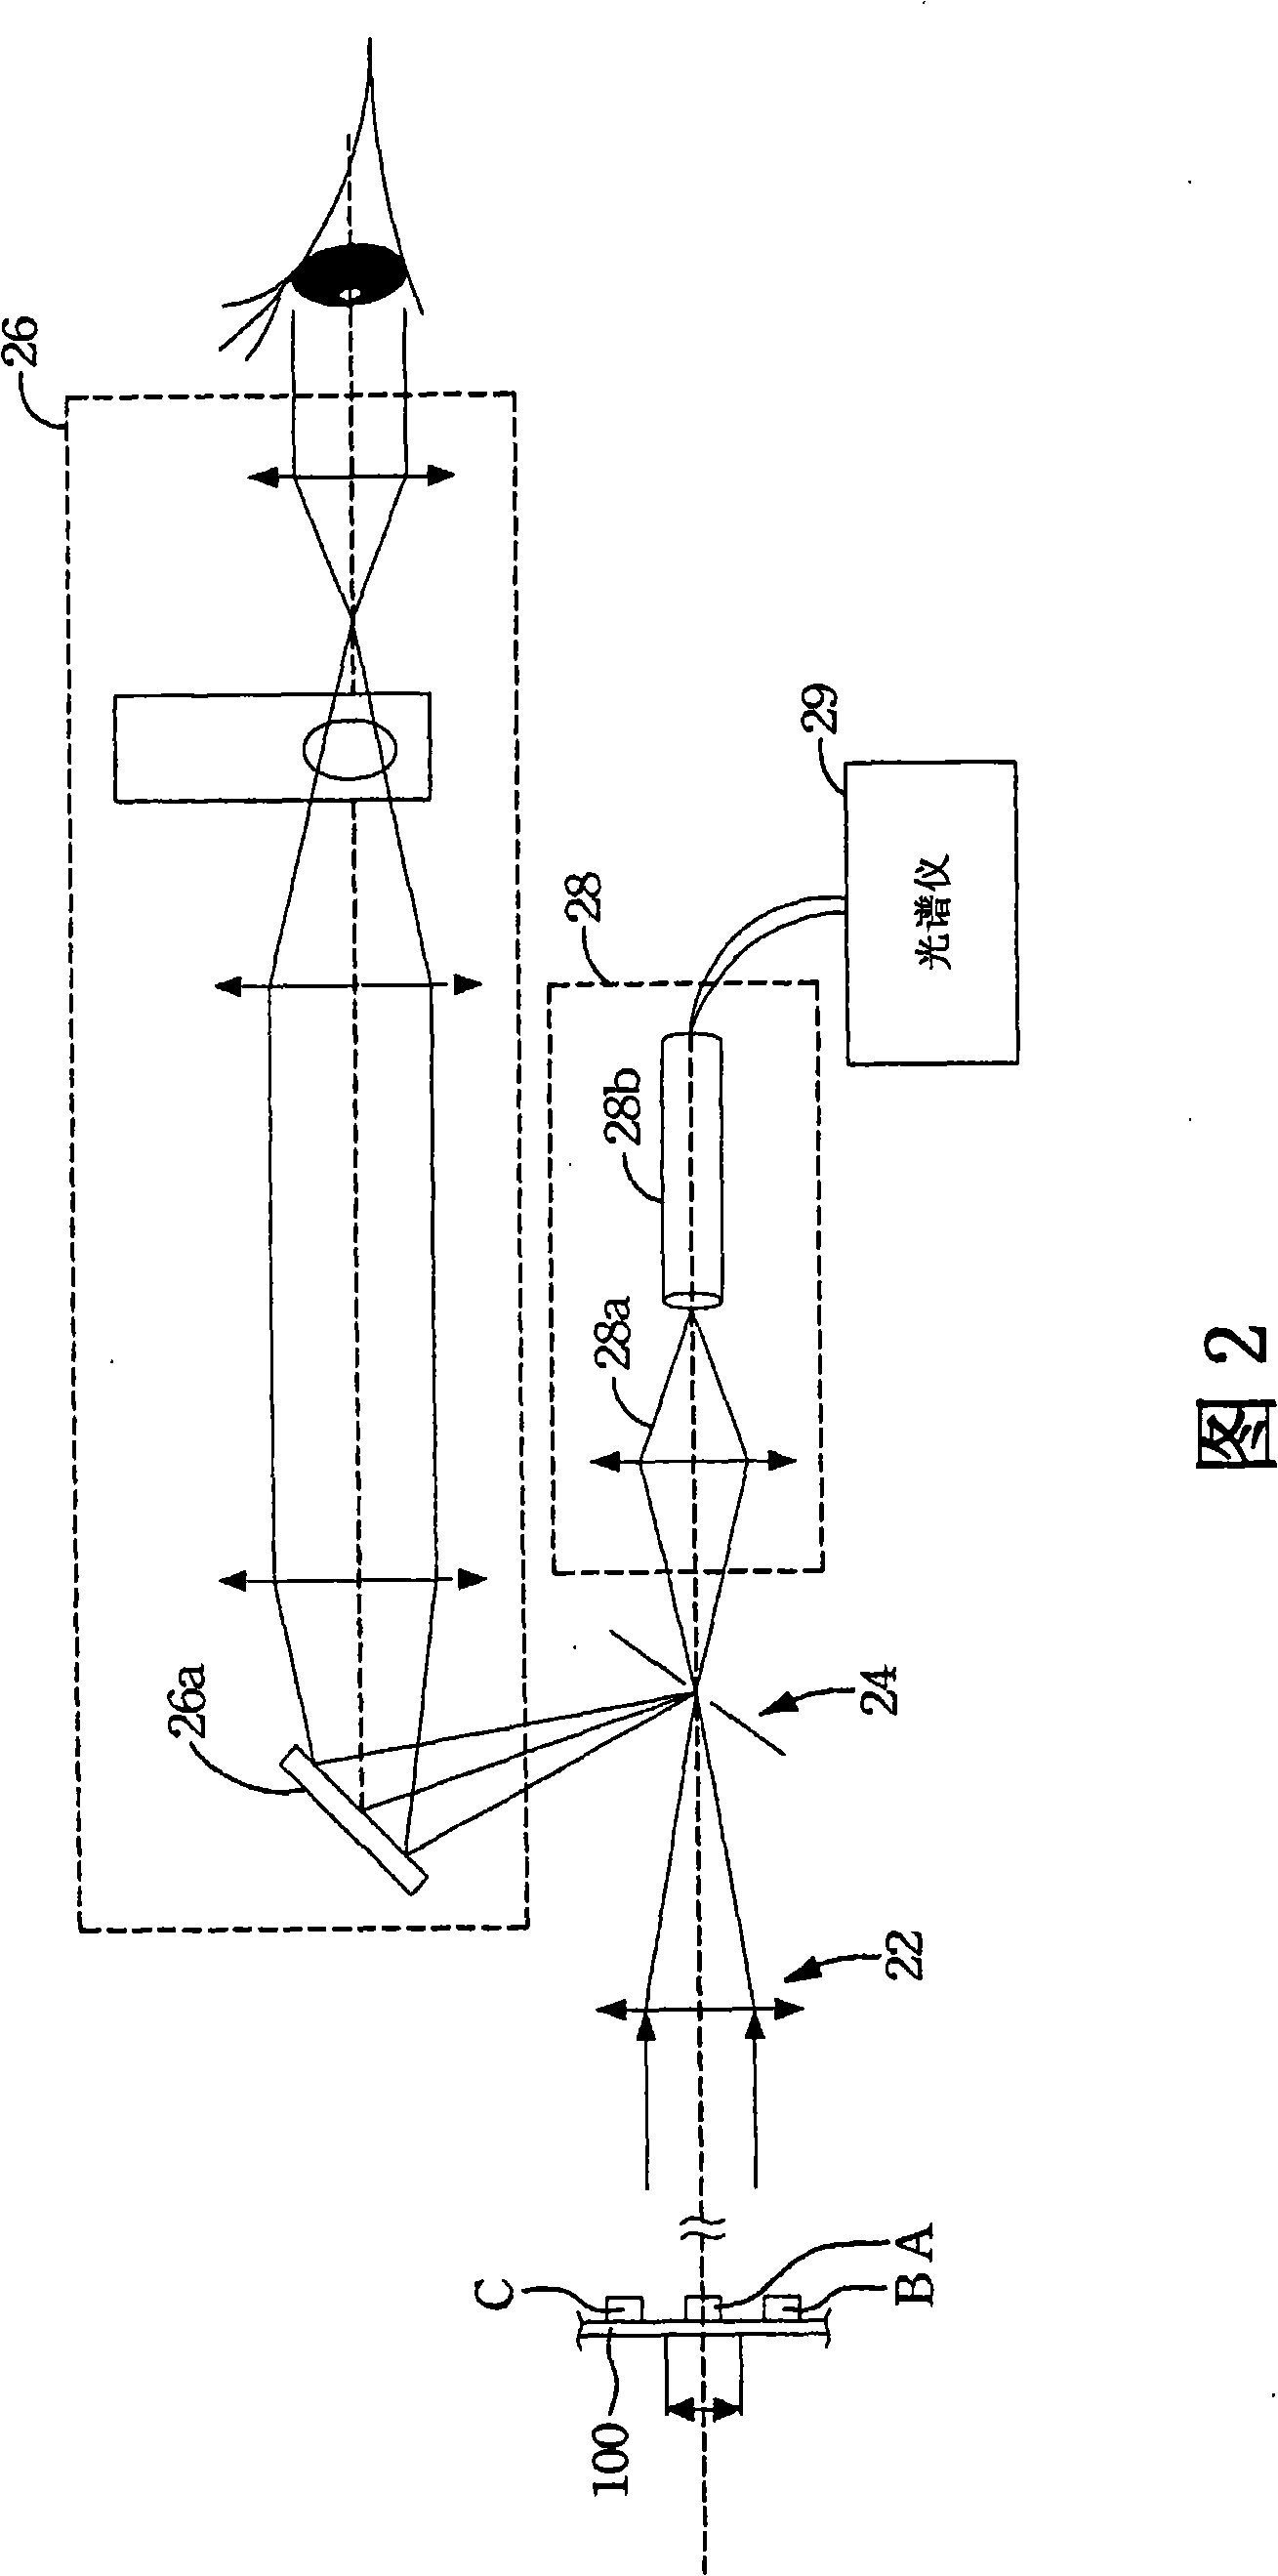 High-speed optical sensing apparatus and system capable of simultaneously sensing luminous intensity and chroma